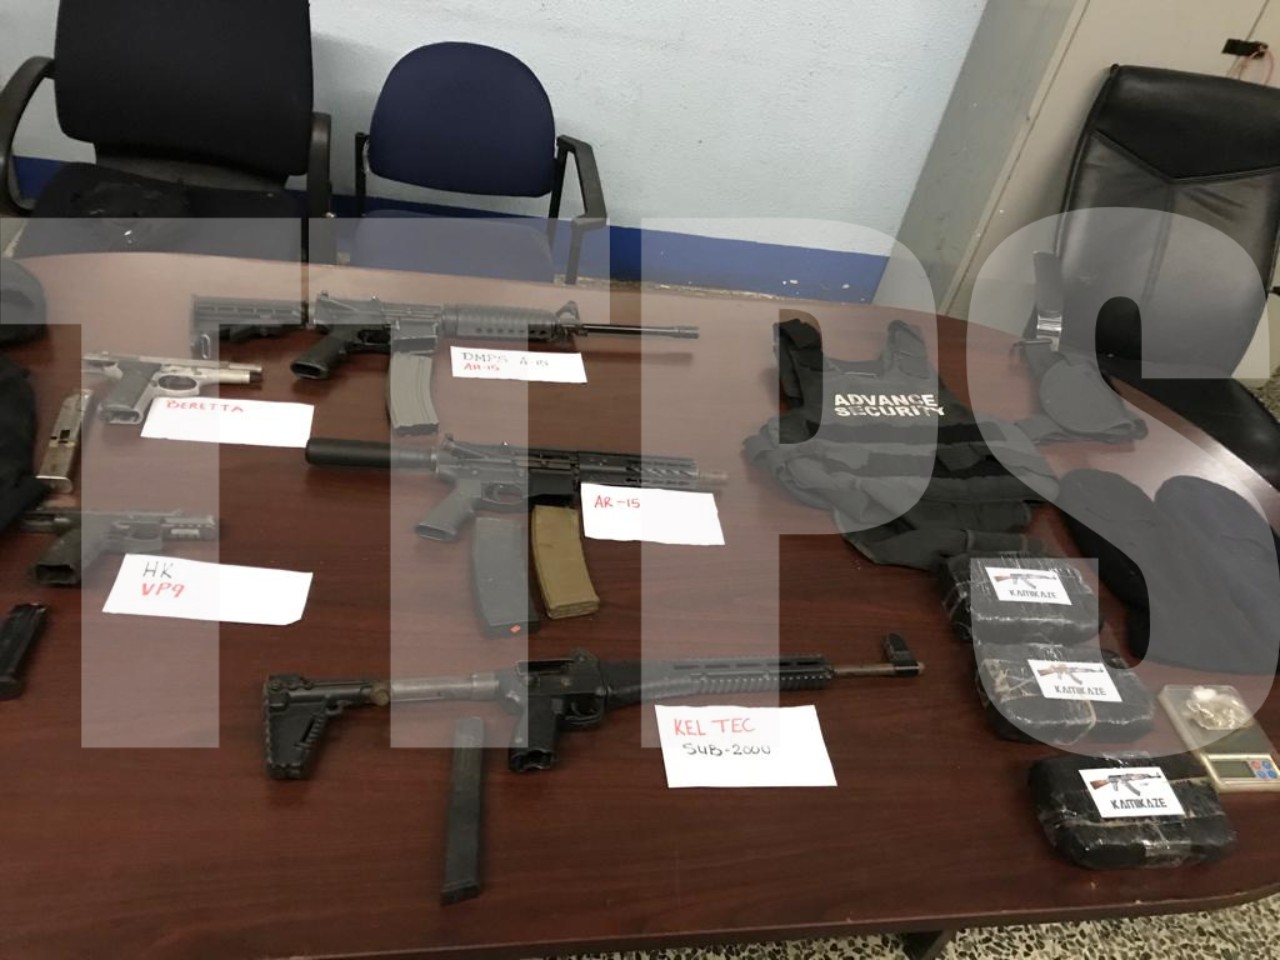 Firearms, ammunition, and marijuana discovered in Diego Martin